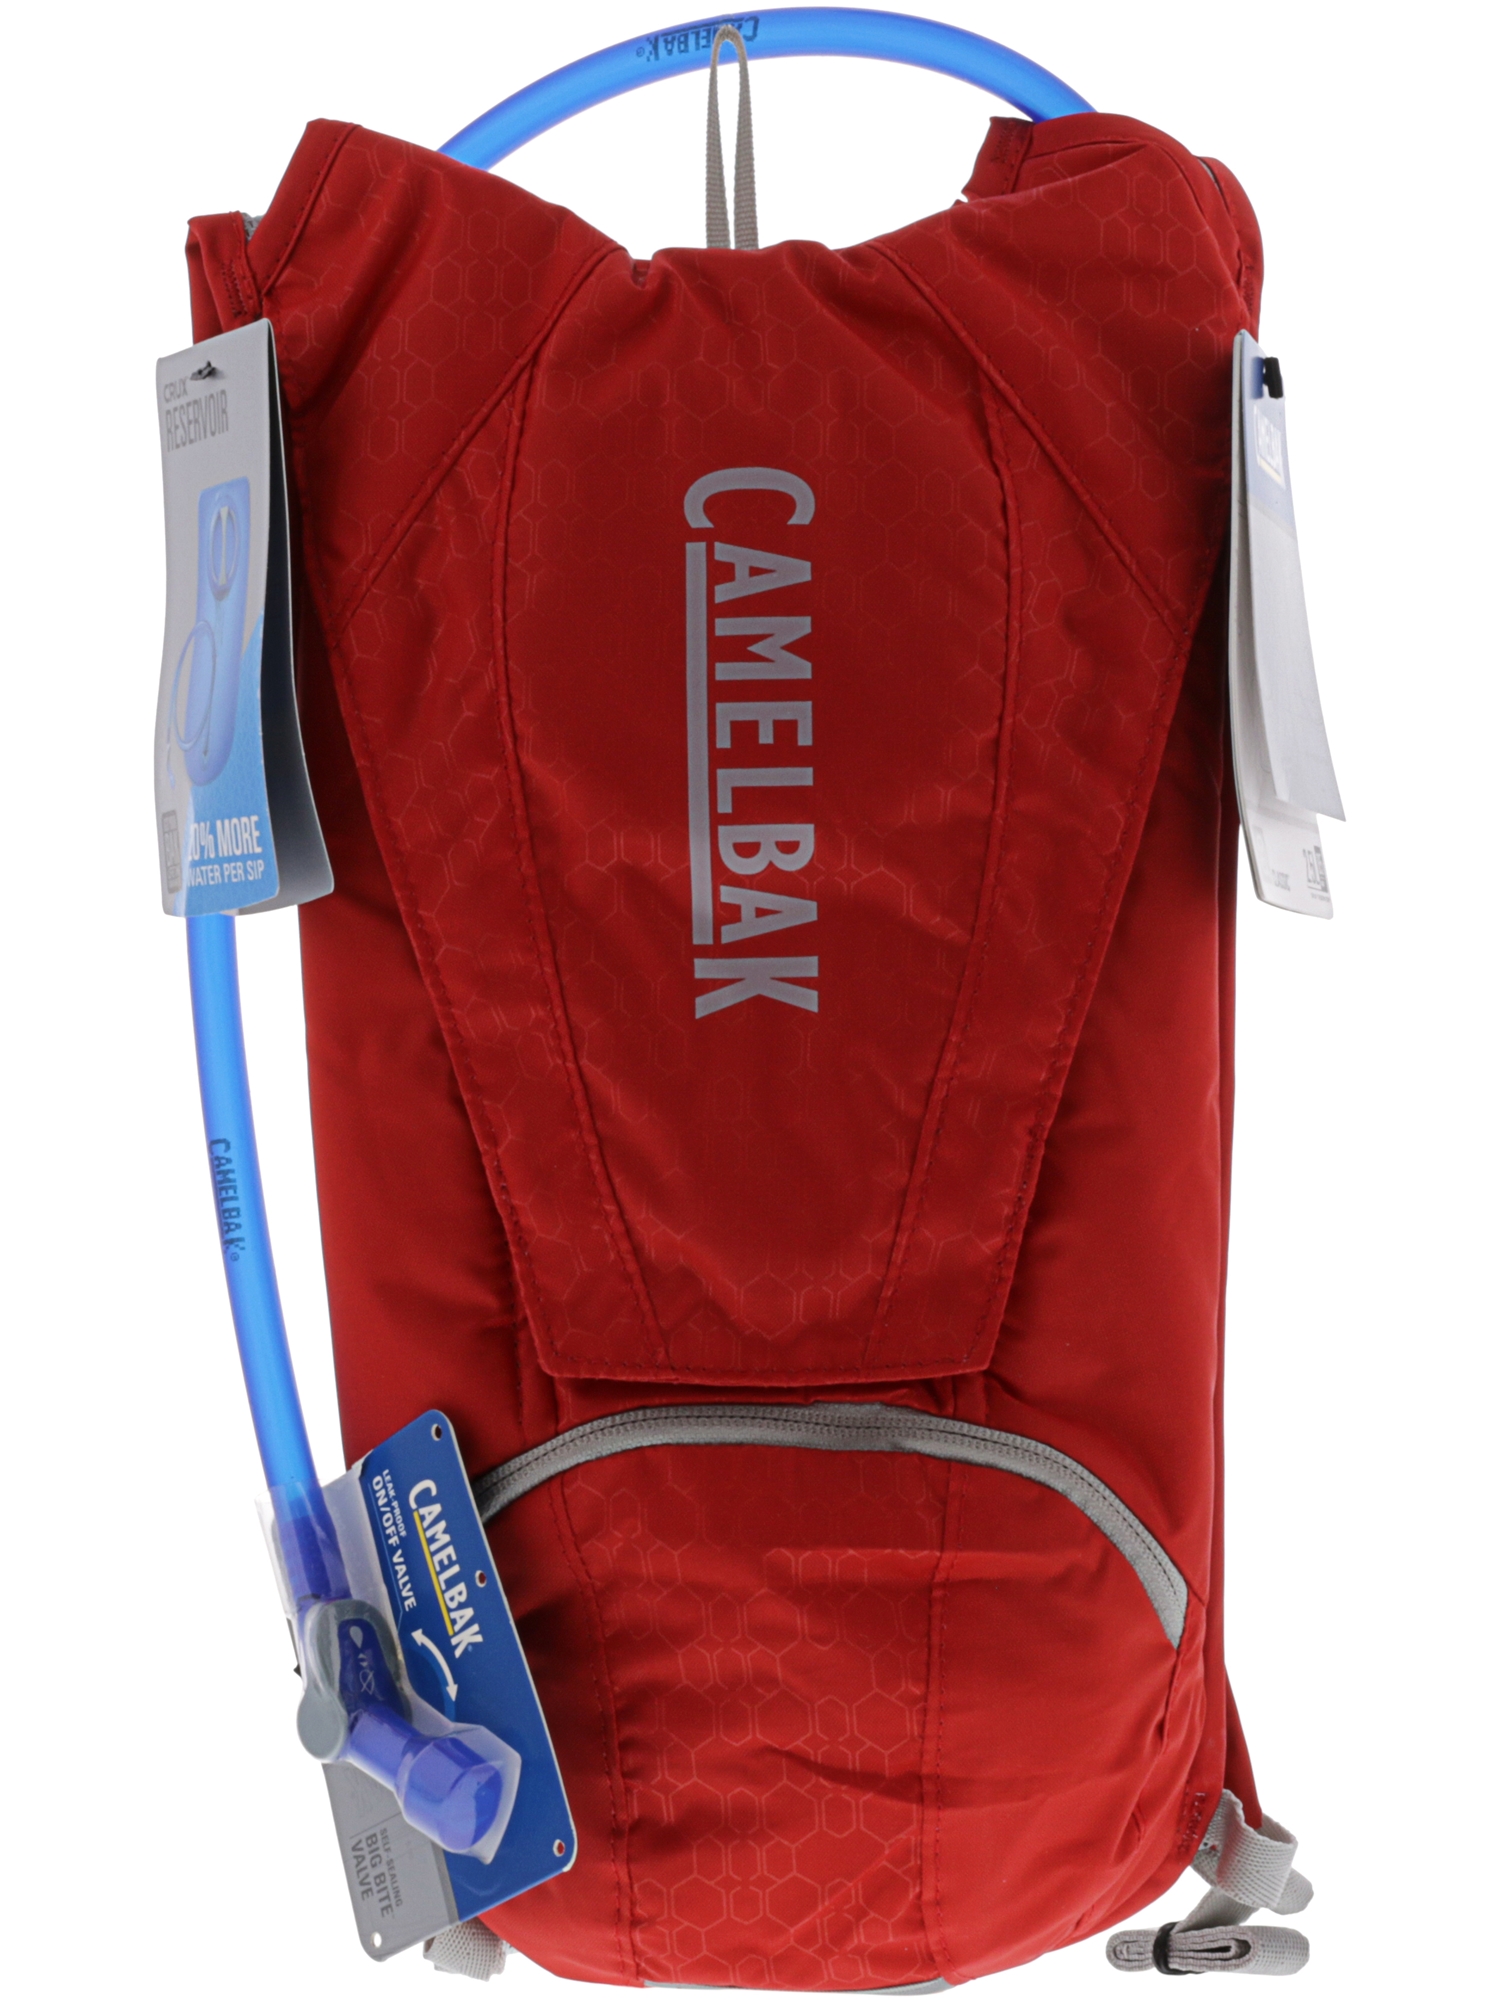 Camelbak Classic Hydration Pack Packs - Racing Red / Silver - image 1 of 3